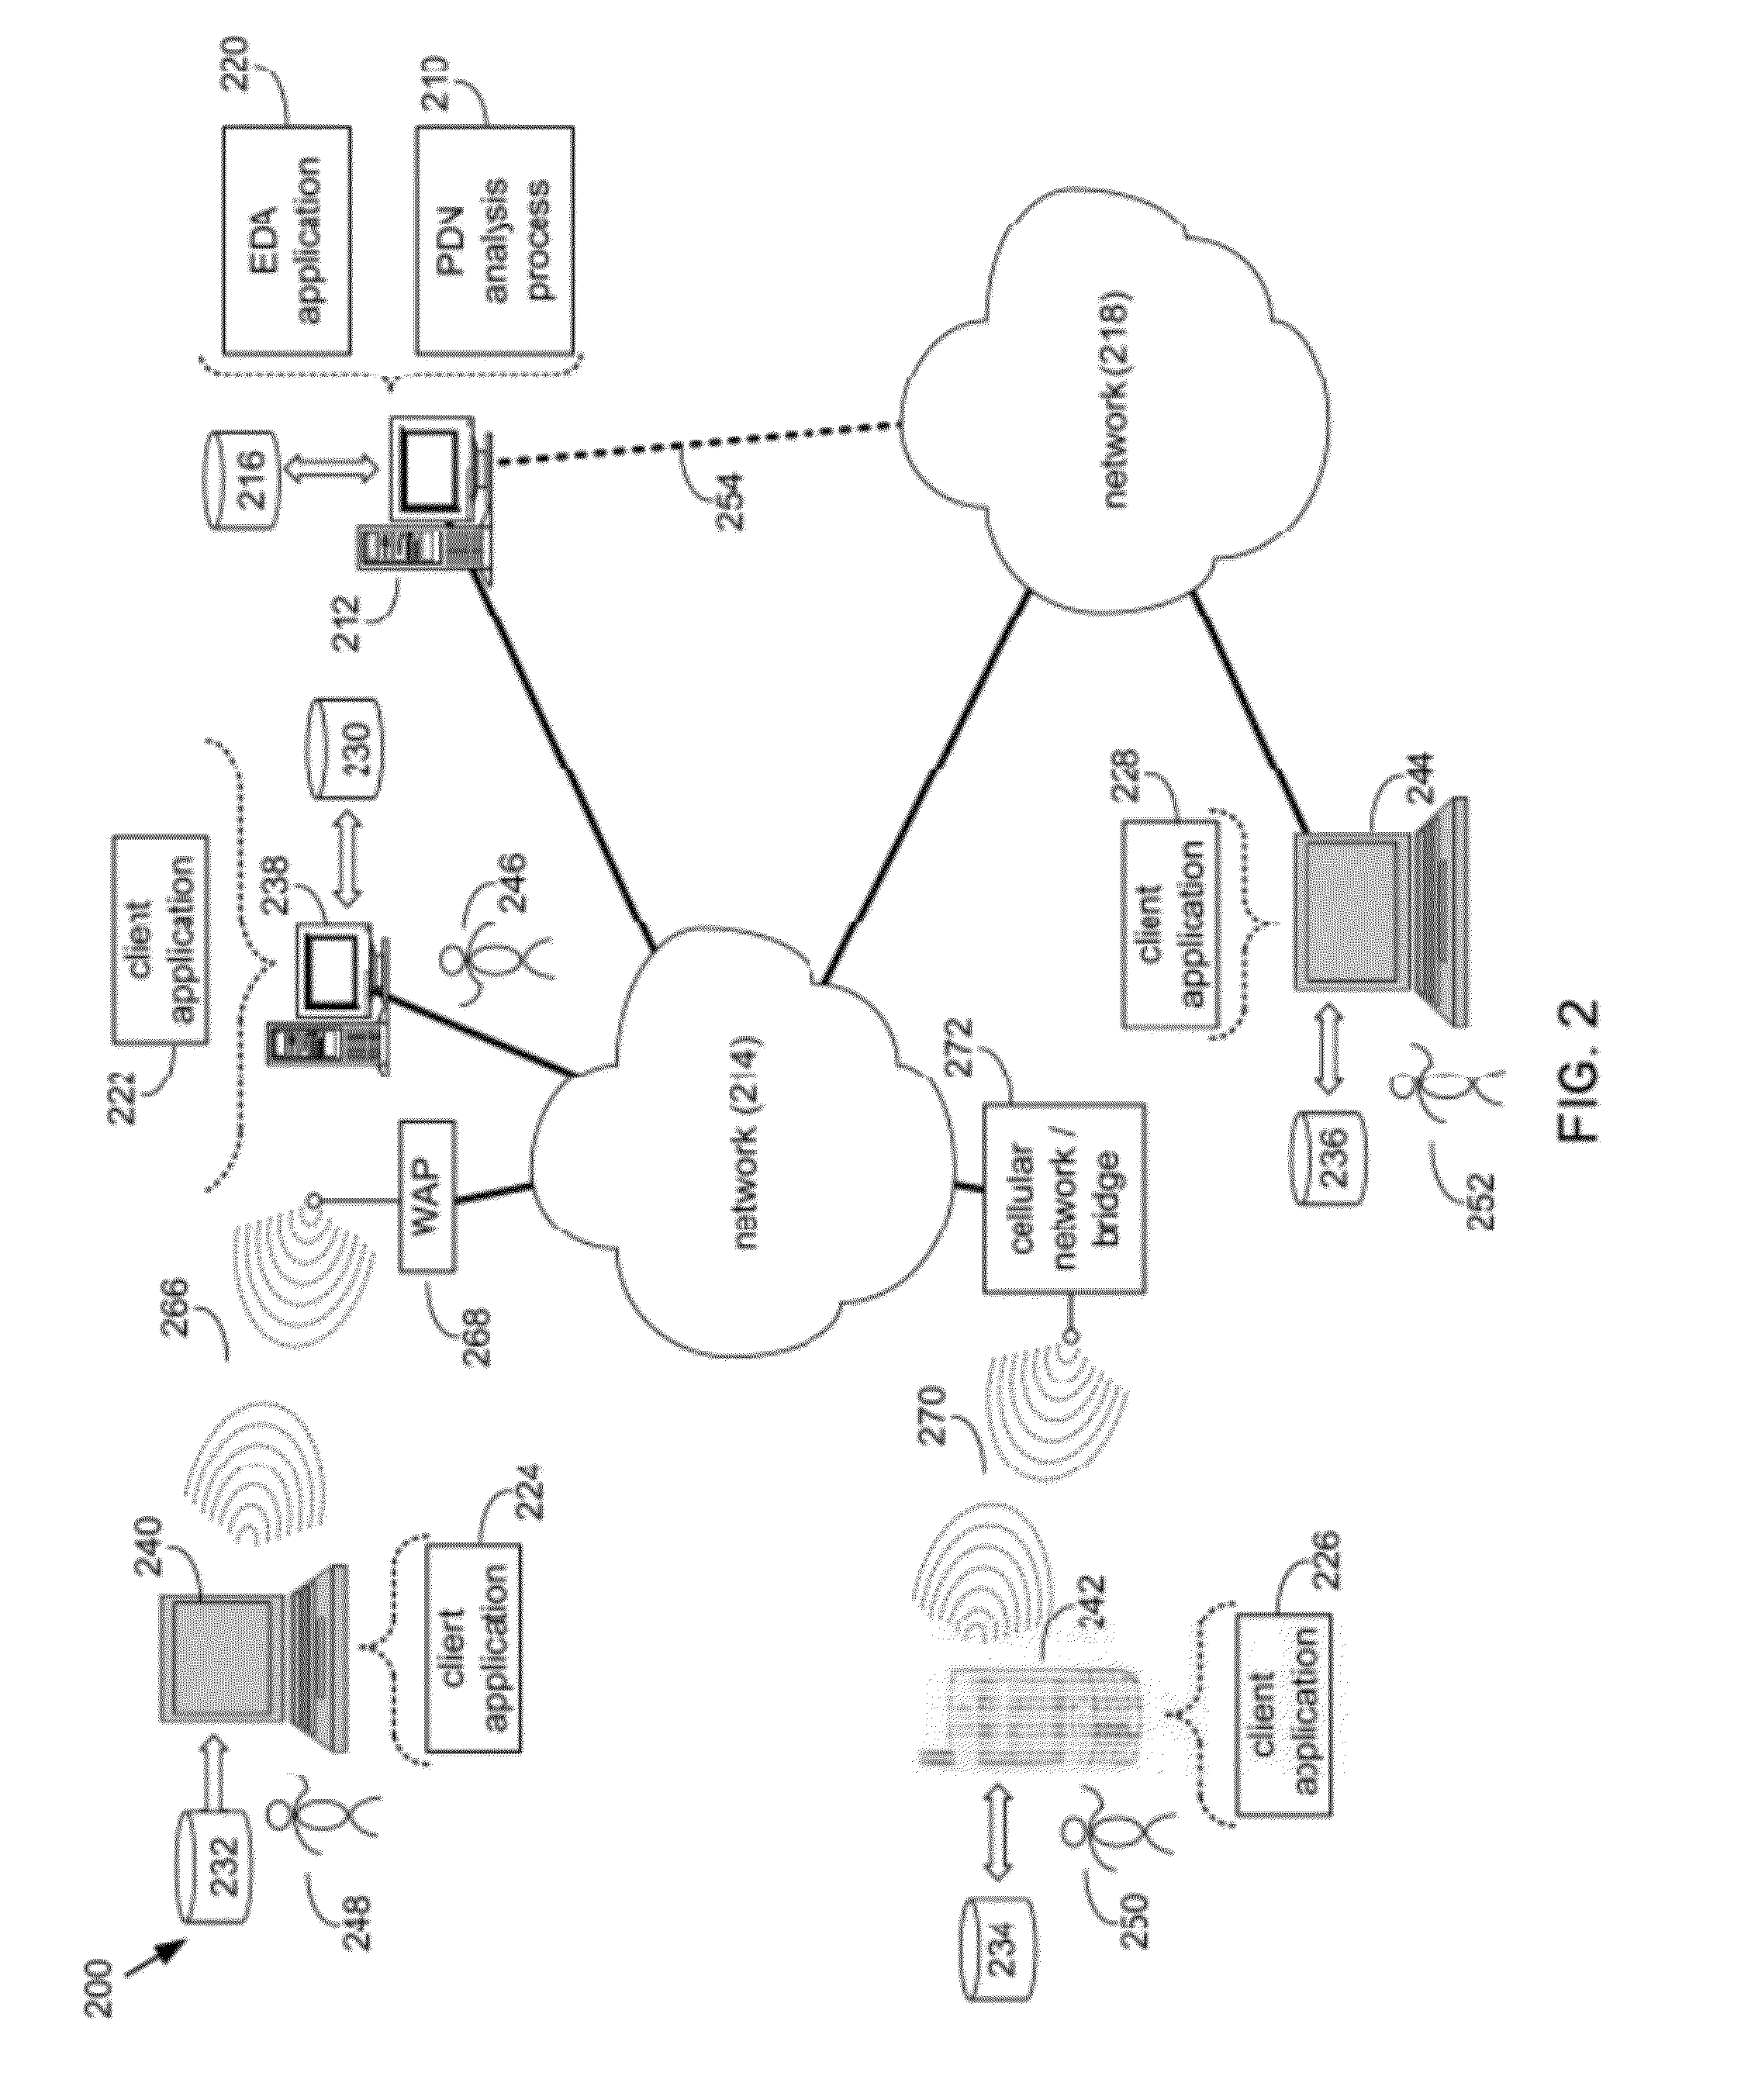 Method and system for power delivery network analysis